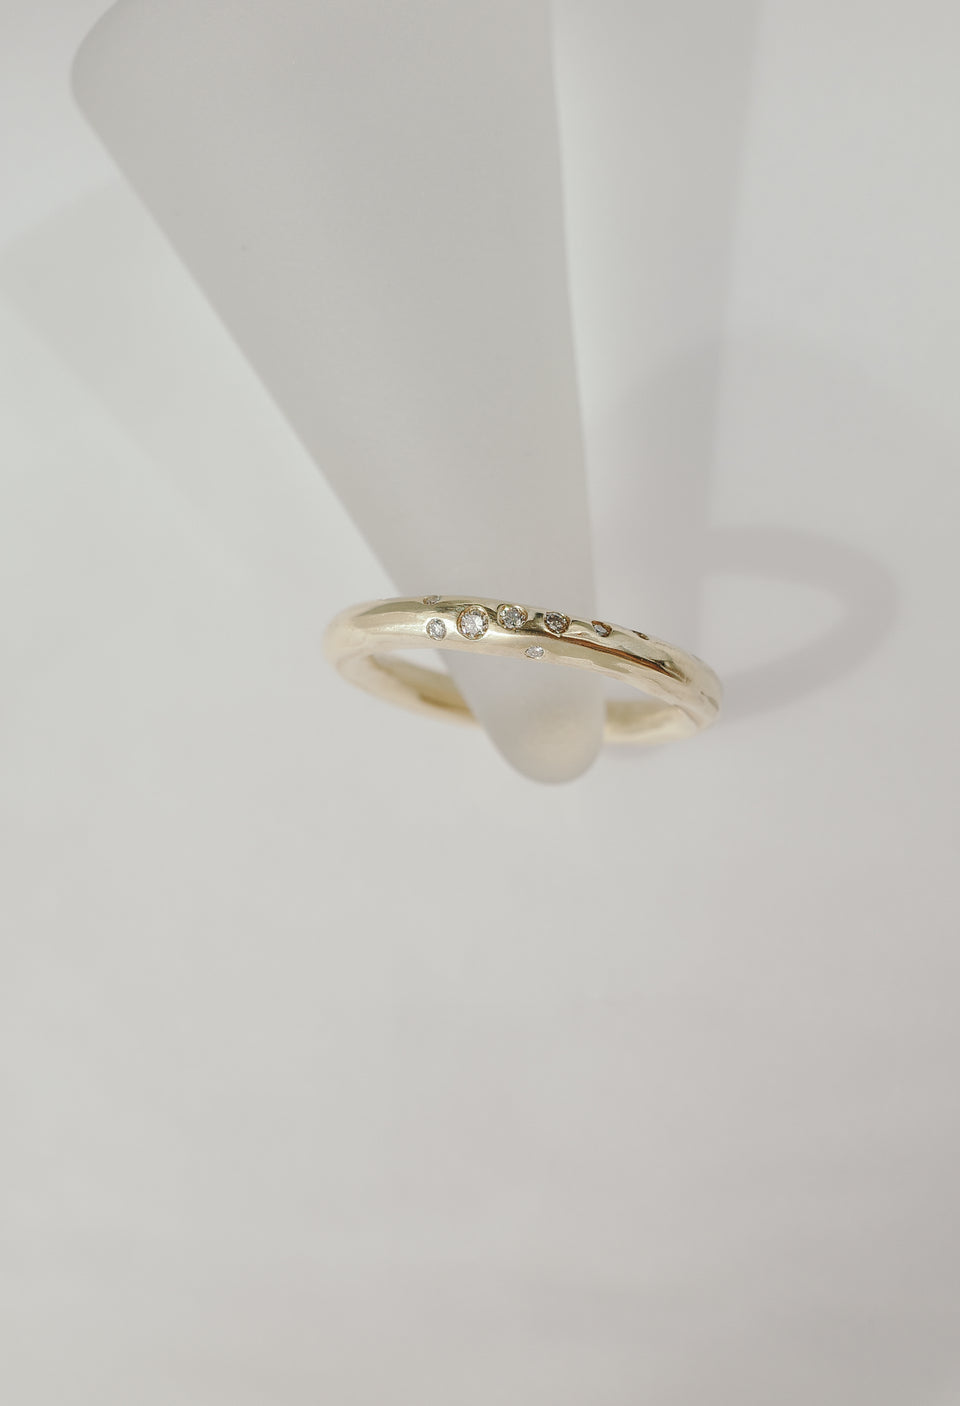 Orbital Round Band in Fairmined Gold with Champagne Diamonds